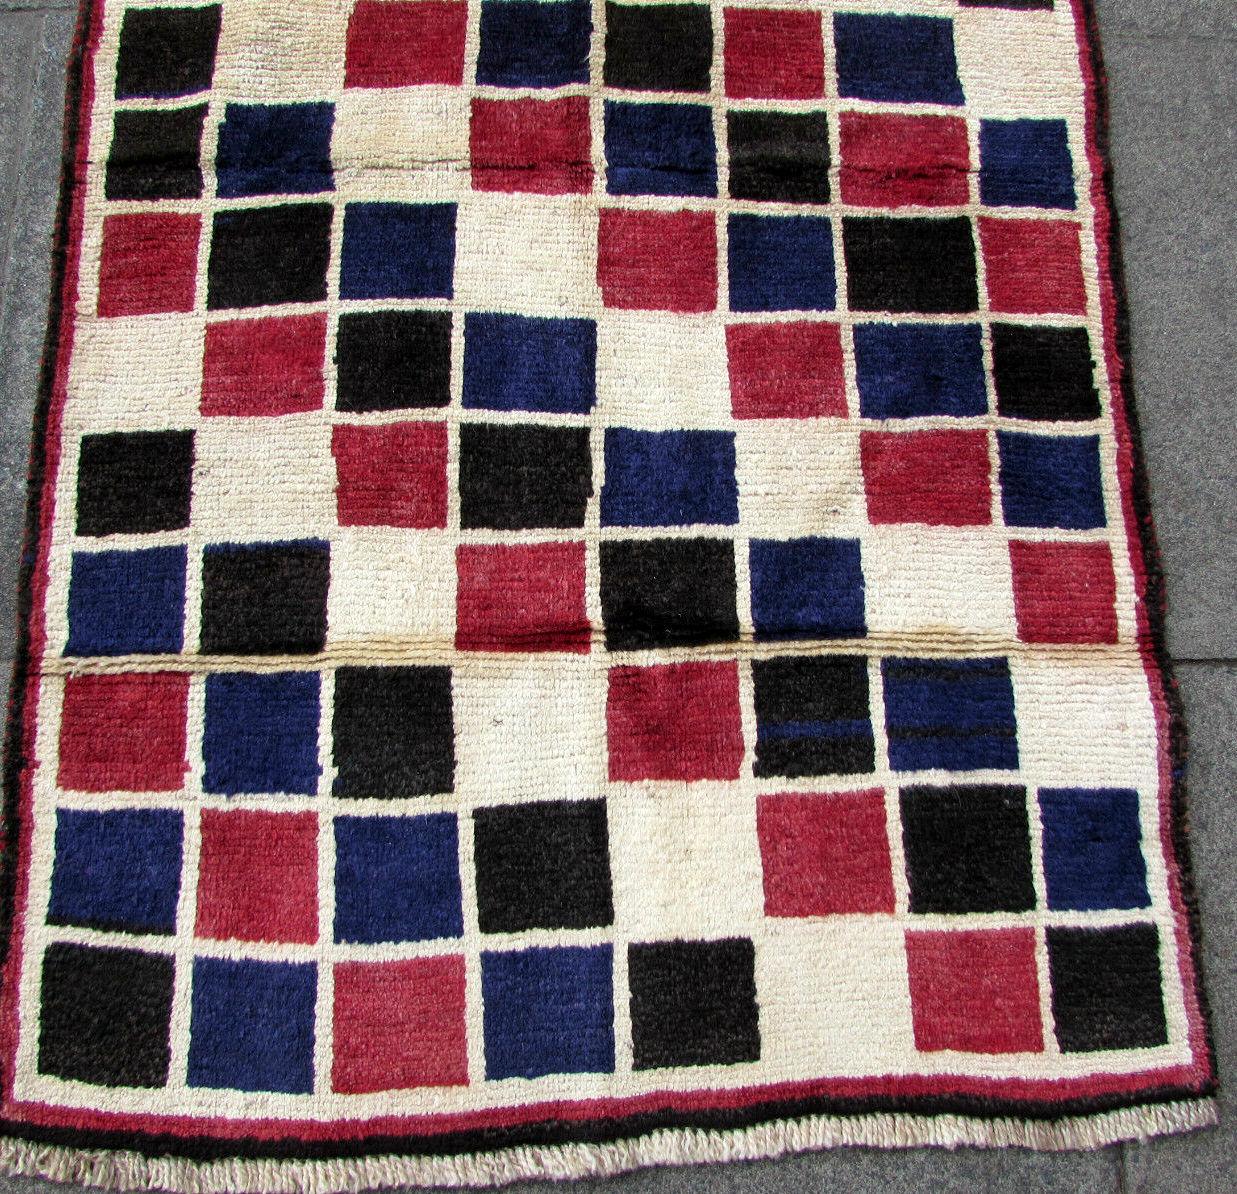 Handmade vintage Gabbeh style rug in geometric design. The rug is from the end of 20th century in original good condition.

-condition: original good,

-circa 1970s,

-size: 3.2' x 5.7' (94cm x 168cm),

-material: wool,

-country of